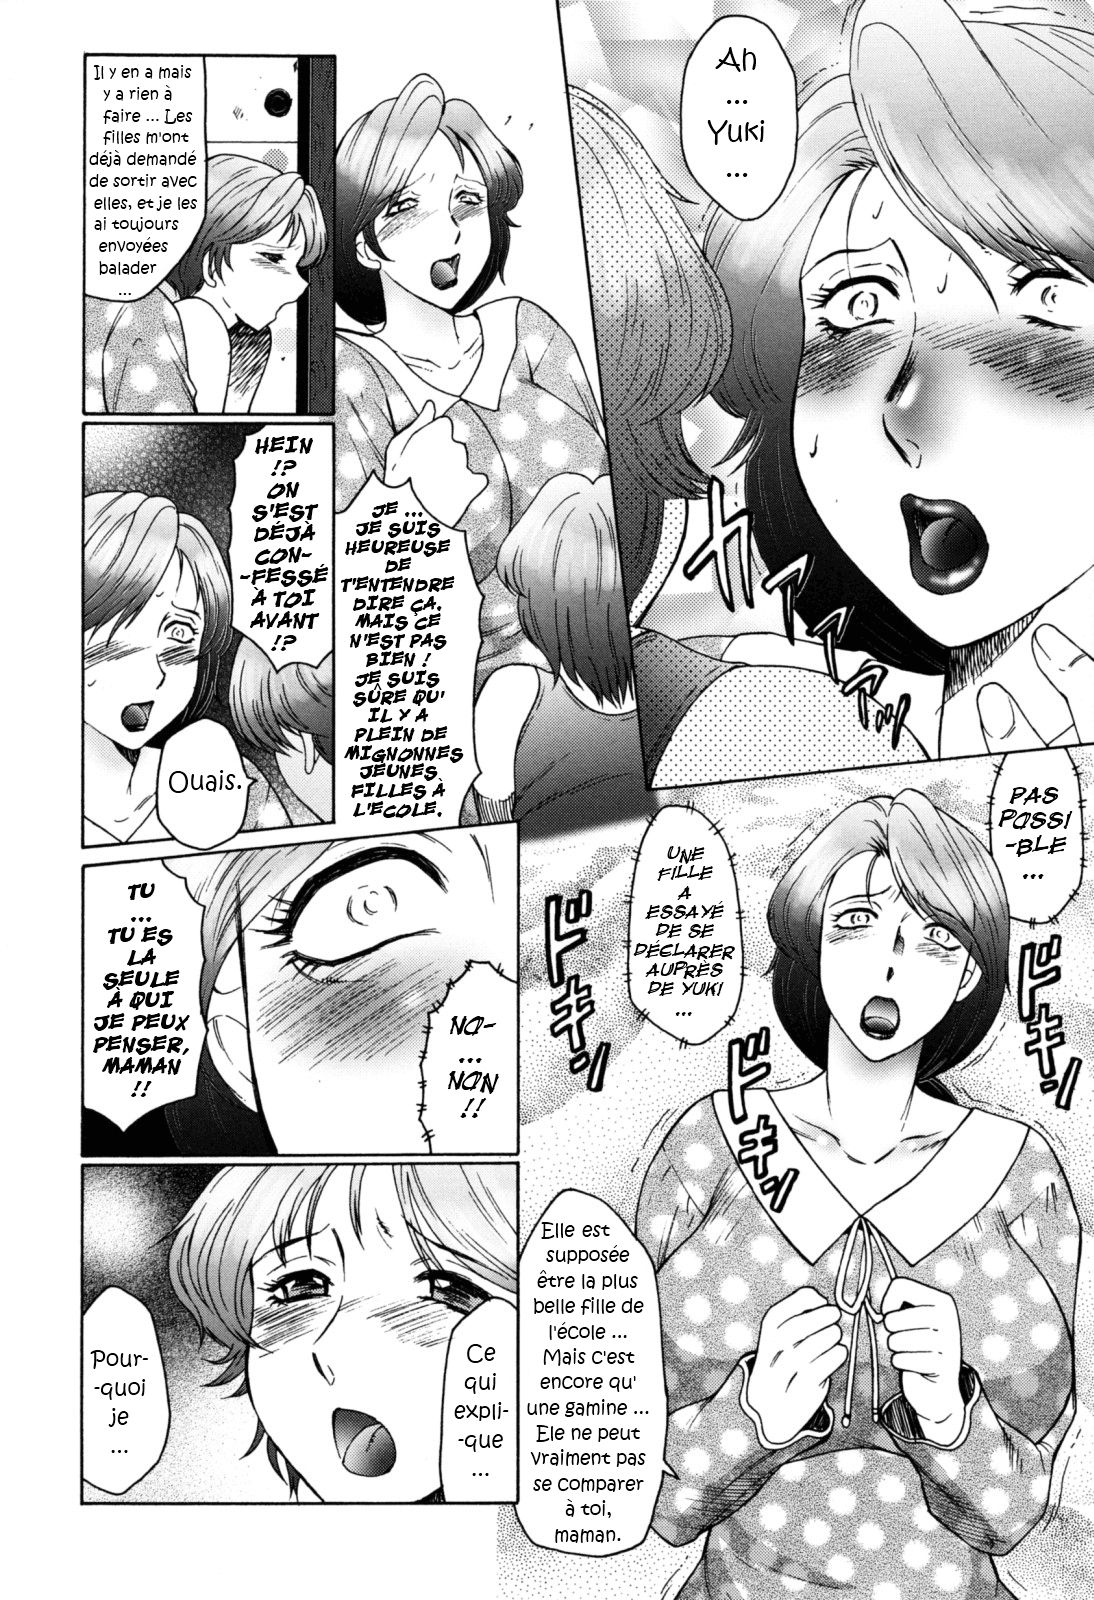 Boshino Toriko - The Captive of Mother and the Son Ch. 1-5 numero d'image 31